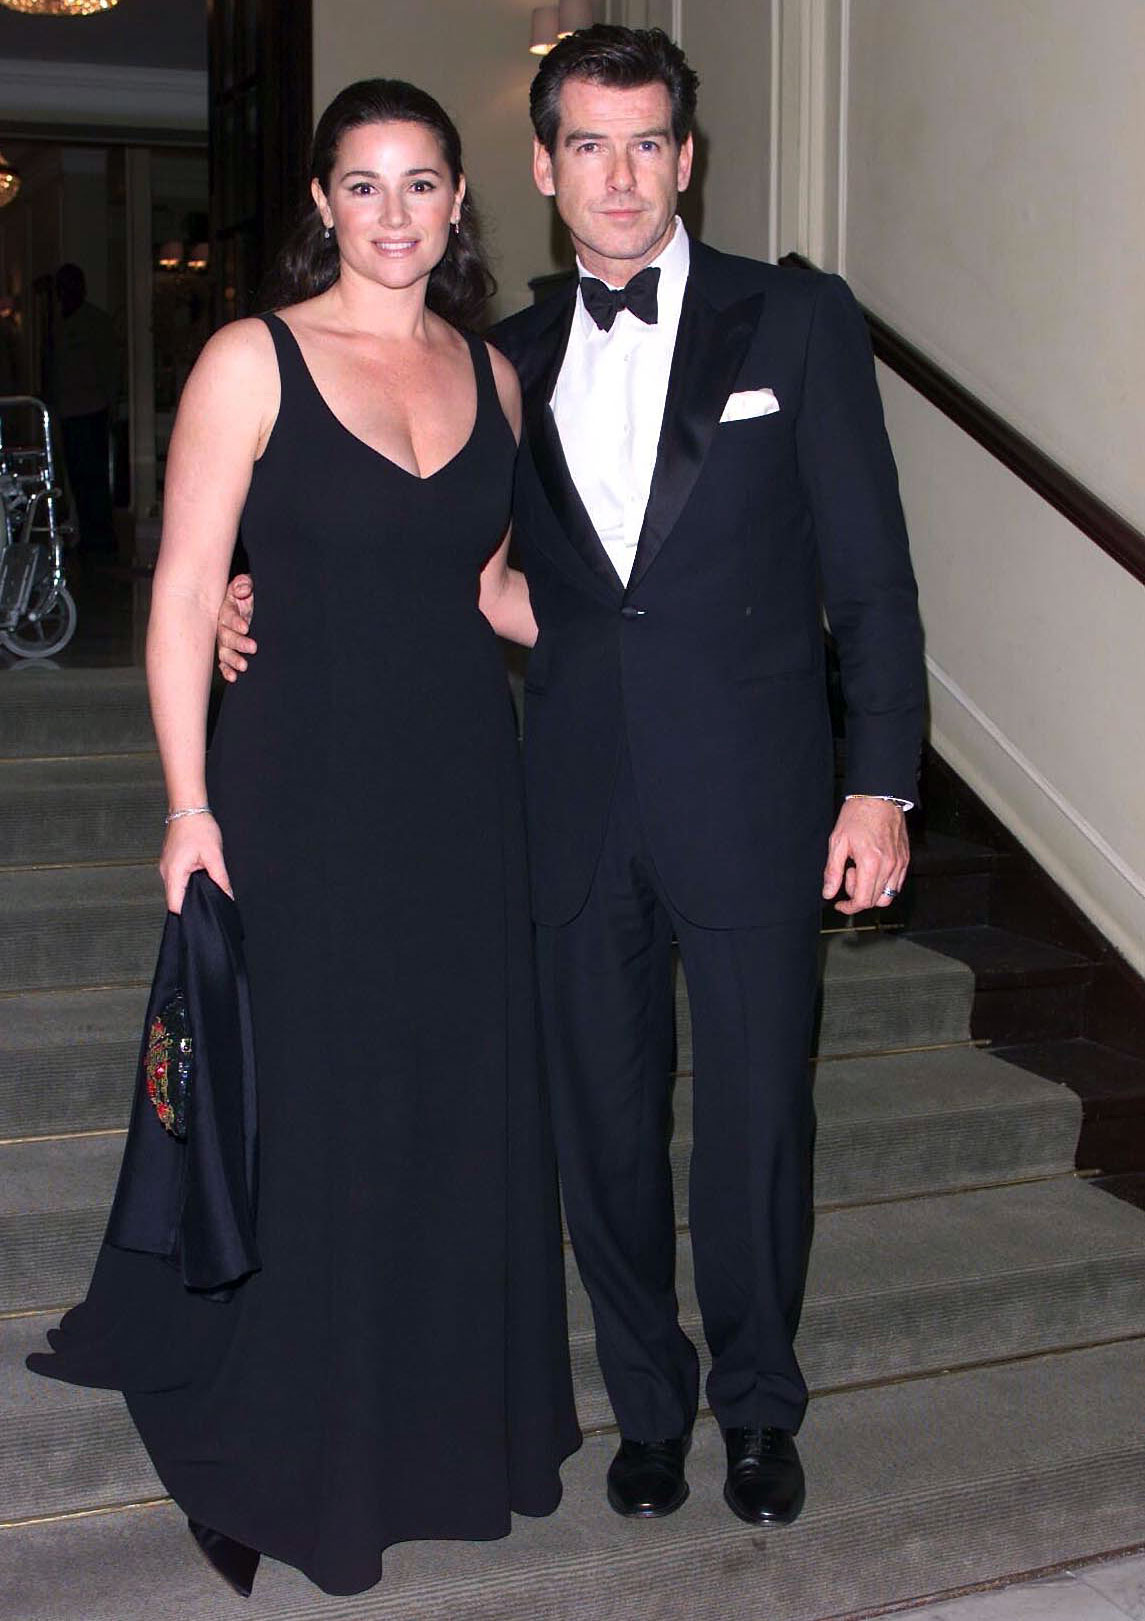 ierce Brosnan and his second wife Keely Shaye Smith